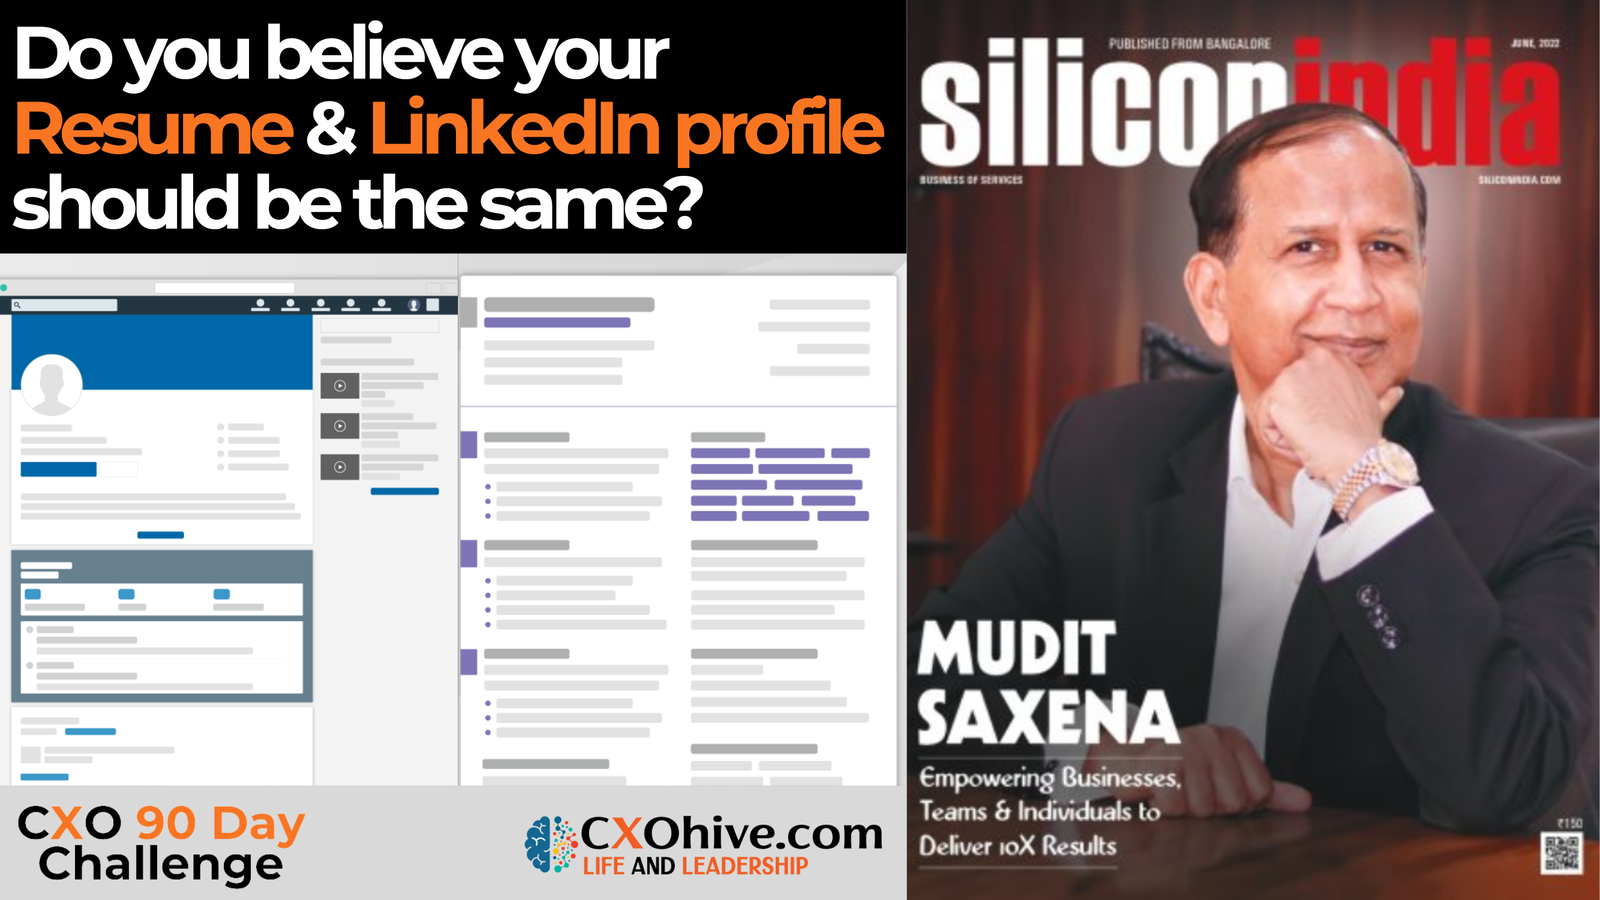 Do you believe your Resume & LinkedIn profile should be the same?